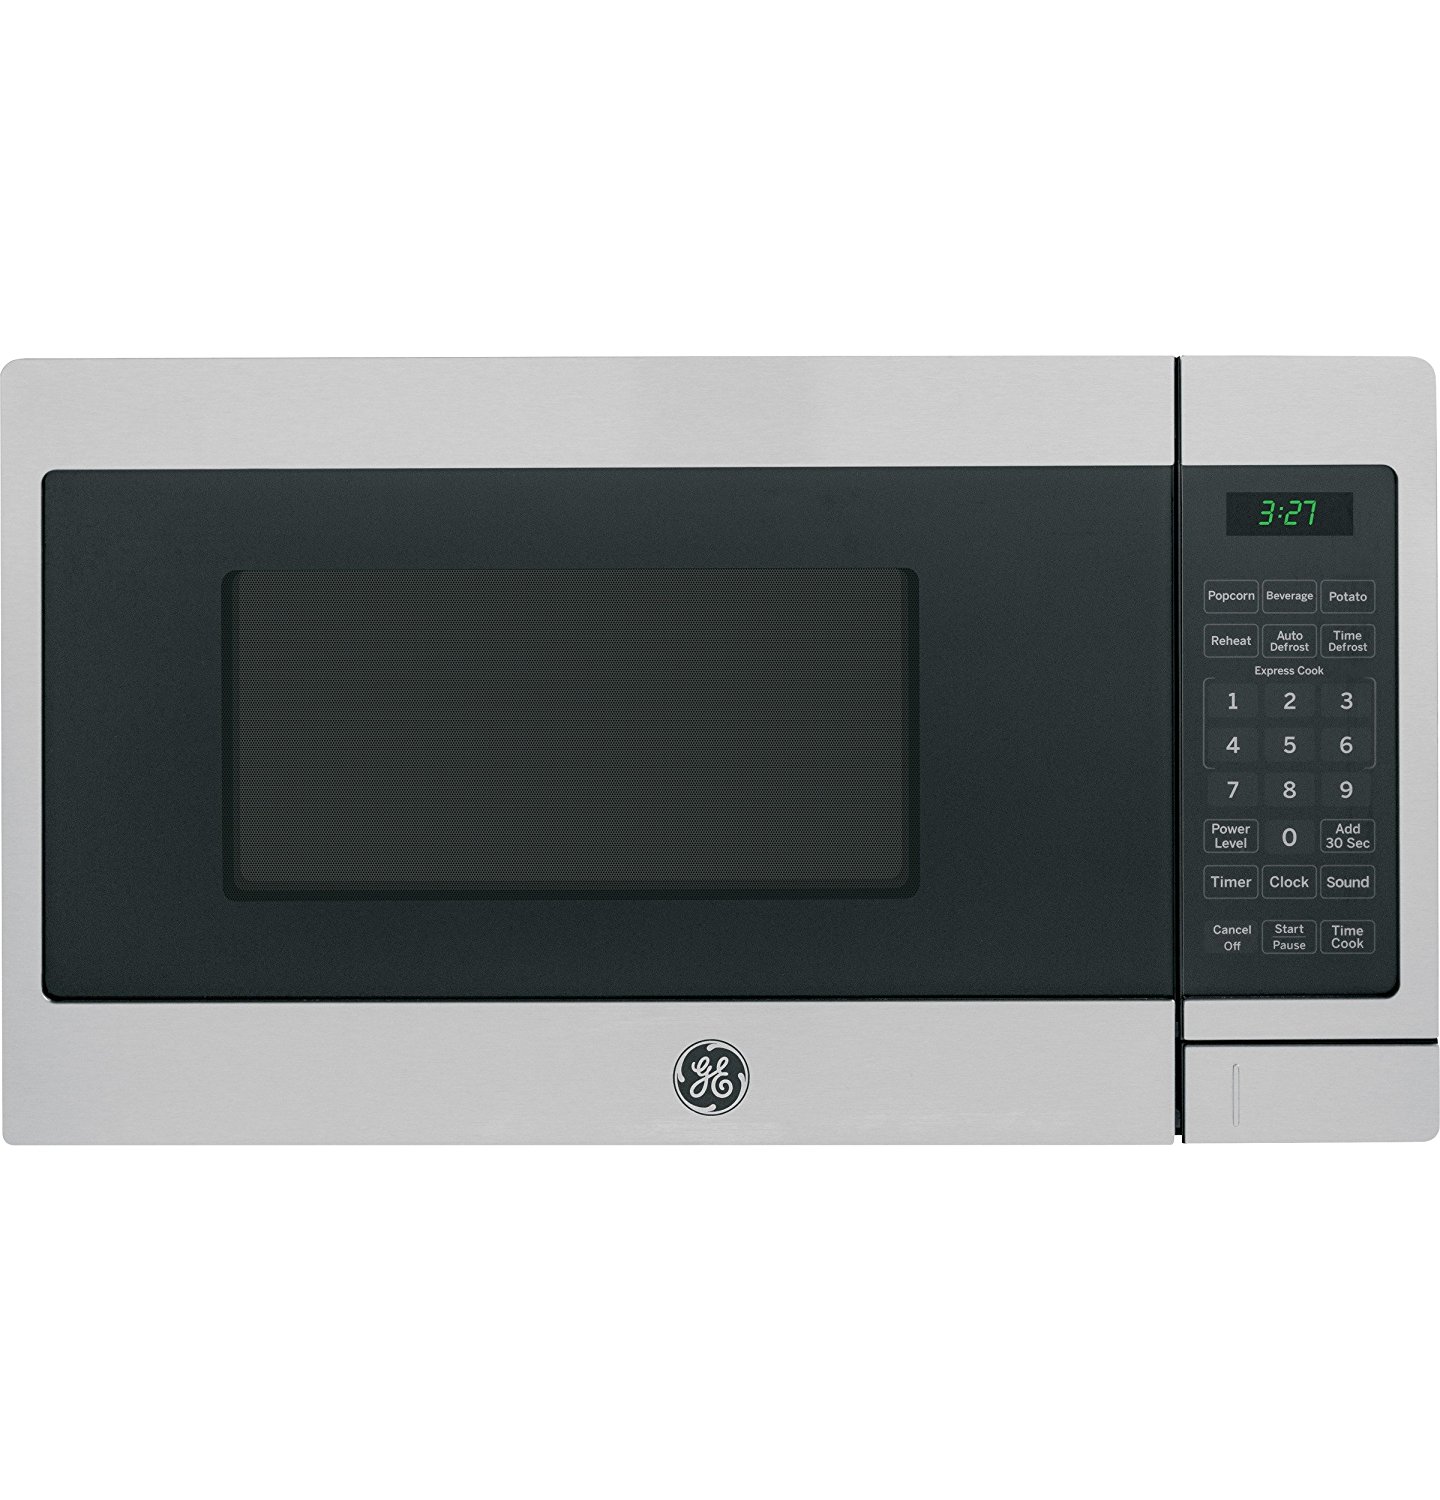 GE JEM3072SHSS 0.7 Cu. Ft. Capacity 700 Watt Countertop Microwave Oven, Auto and Time Defrost in Stainless Steel